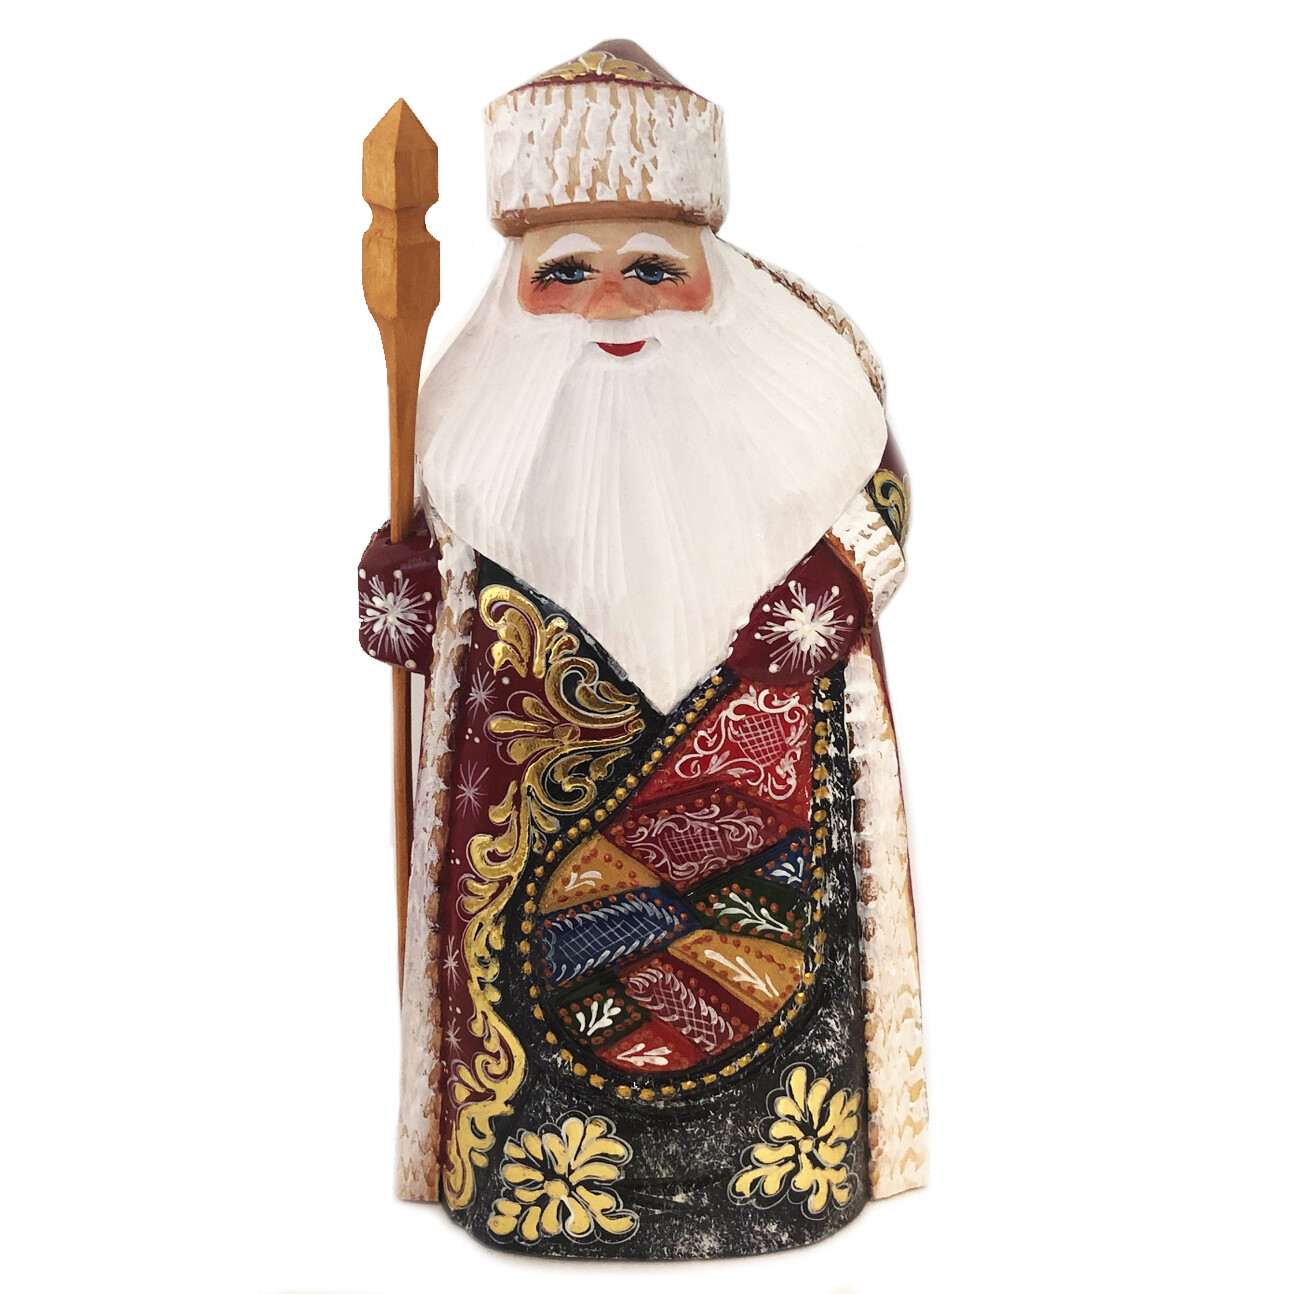 SANTA CLAUS STATUETTE CHRISTMAS RUSSIAN FATHER FROST HAND CARVED WOODEN FIGURE